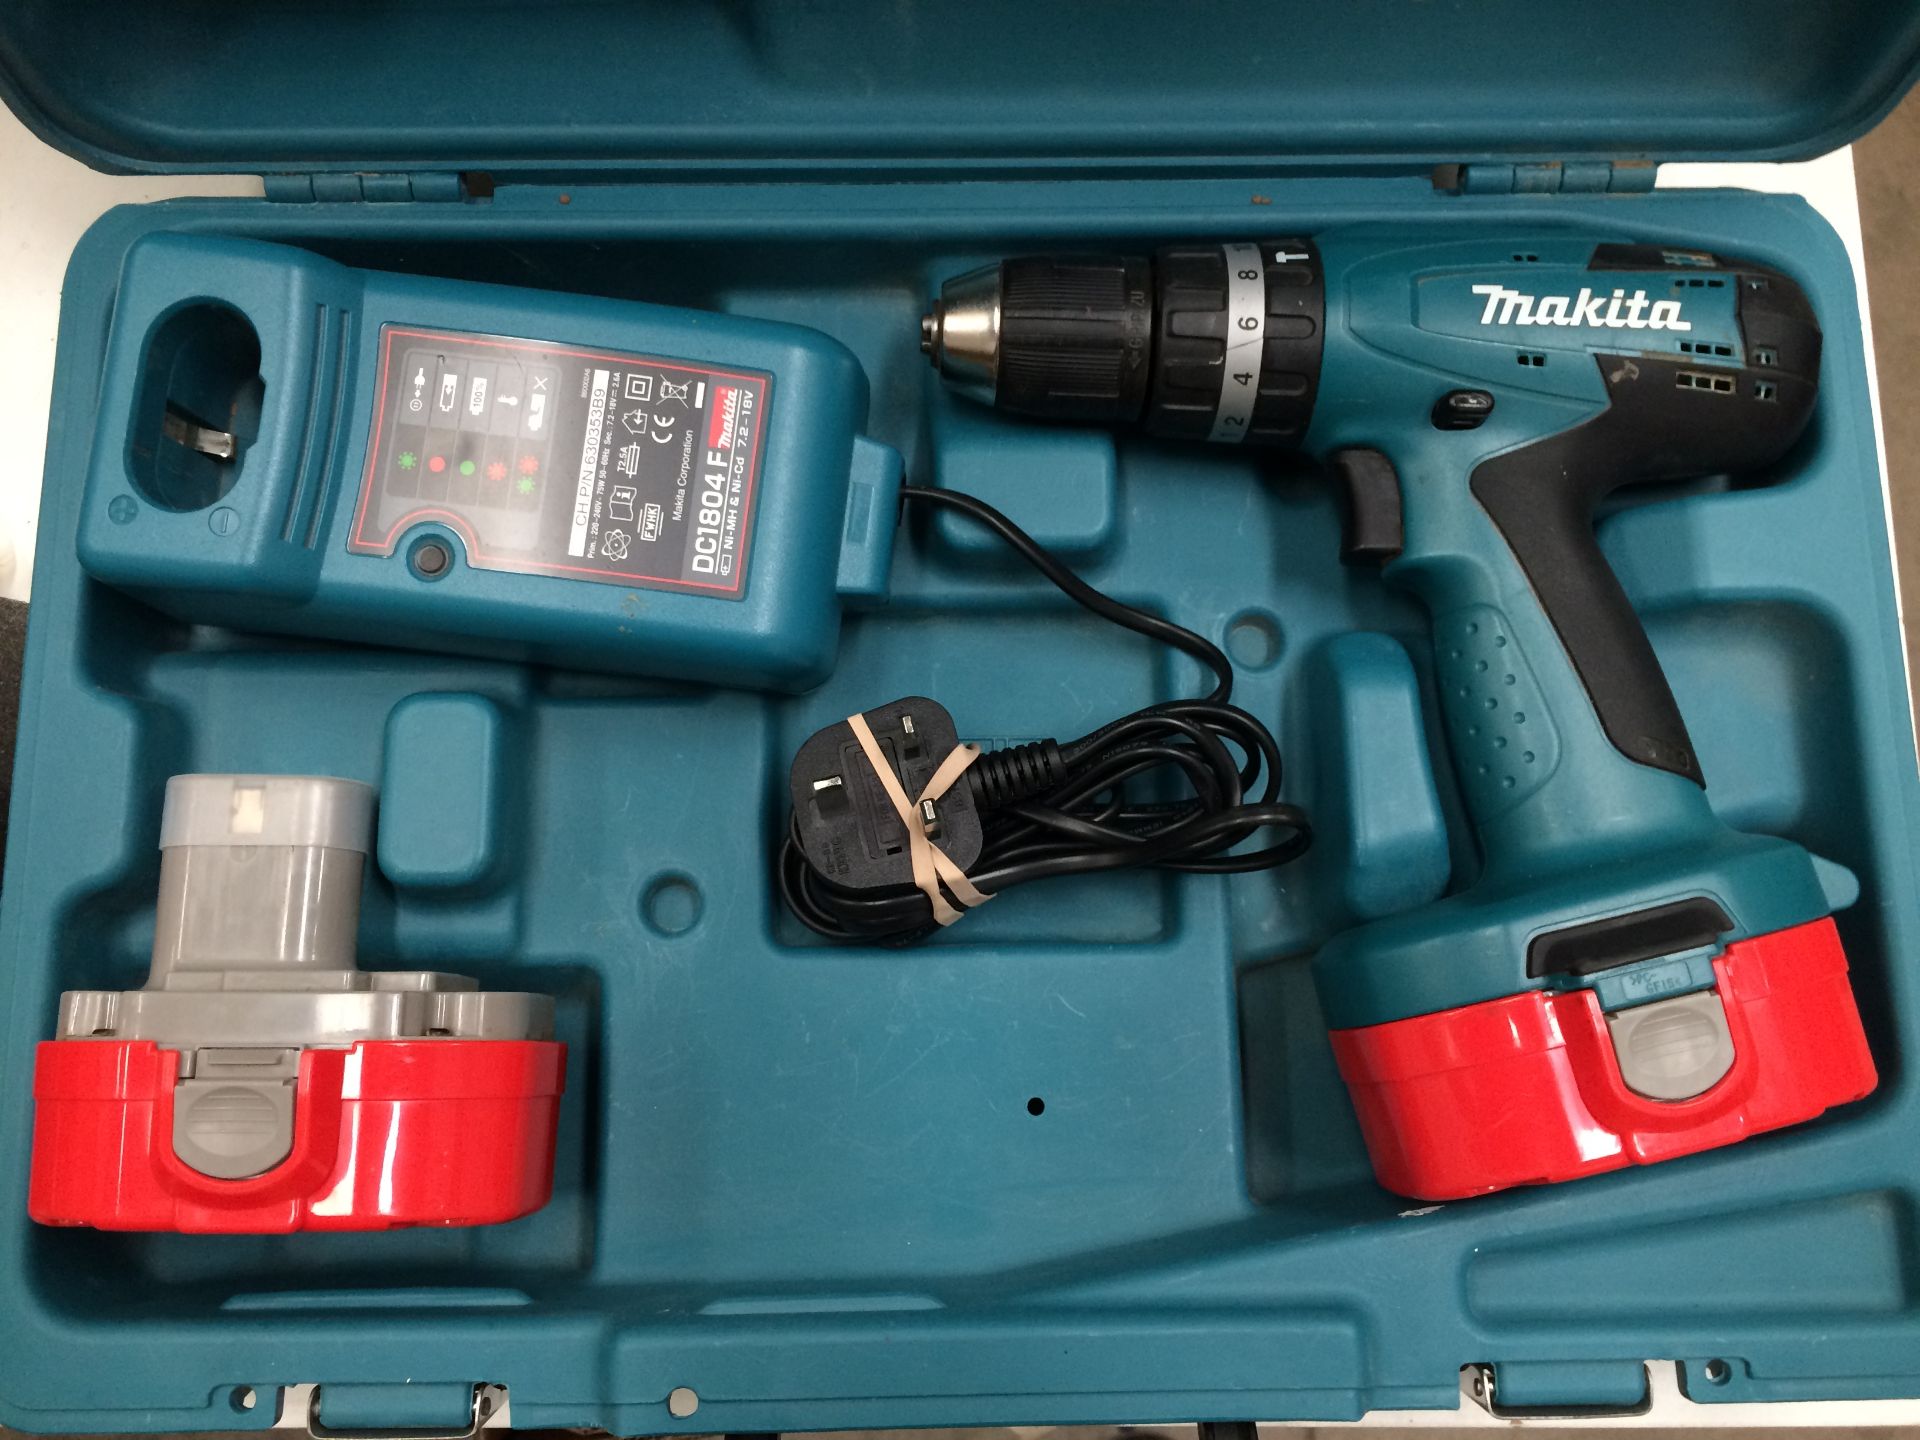 Makita 8391D 18v cordless hammer drill in case complete with charger and two batteries